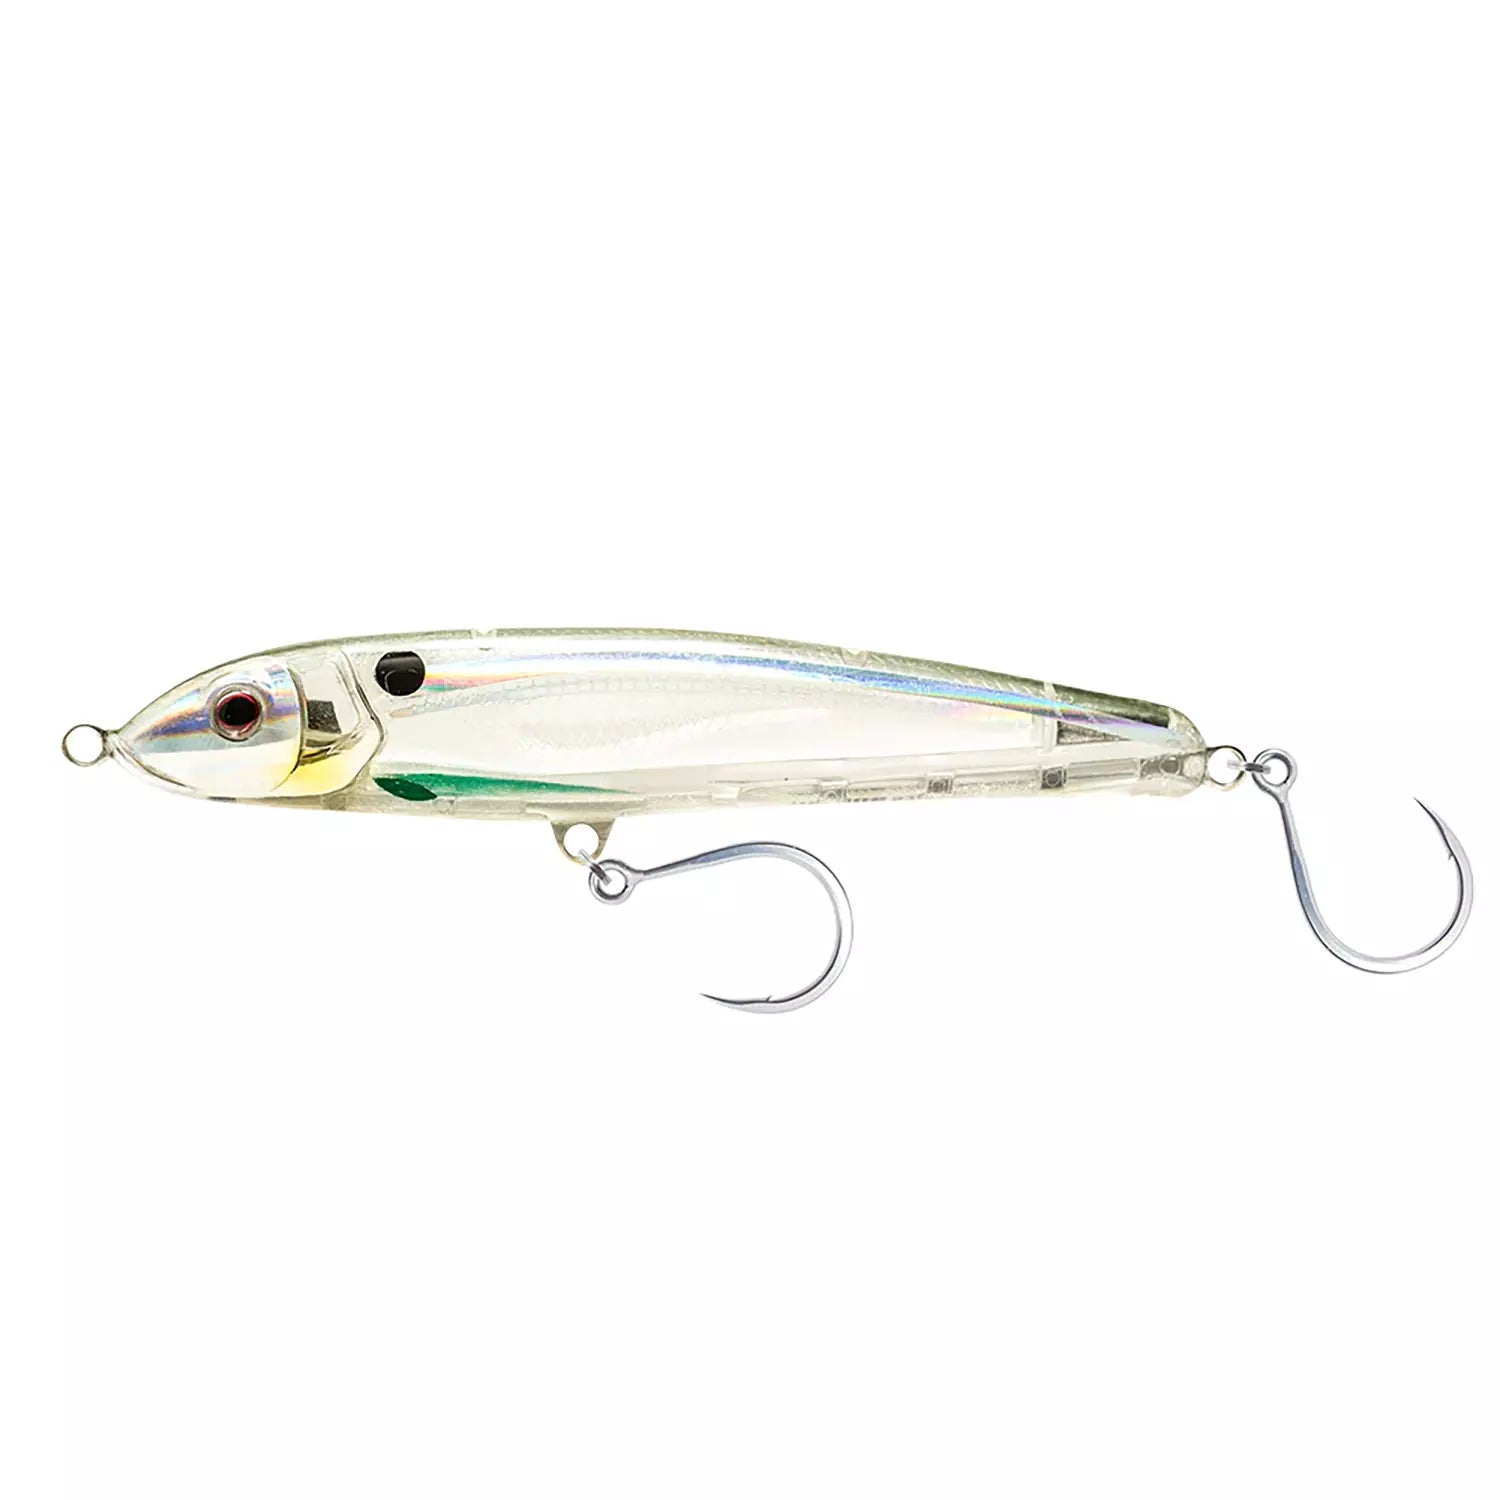 Nomad Design Riptide Floating Stickbait Lure-Lure - Poppers, Stickbaits & Pencils-Nomad-Holo Ghost Shad-200mm-Fishing Station